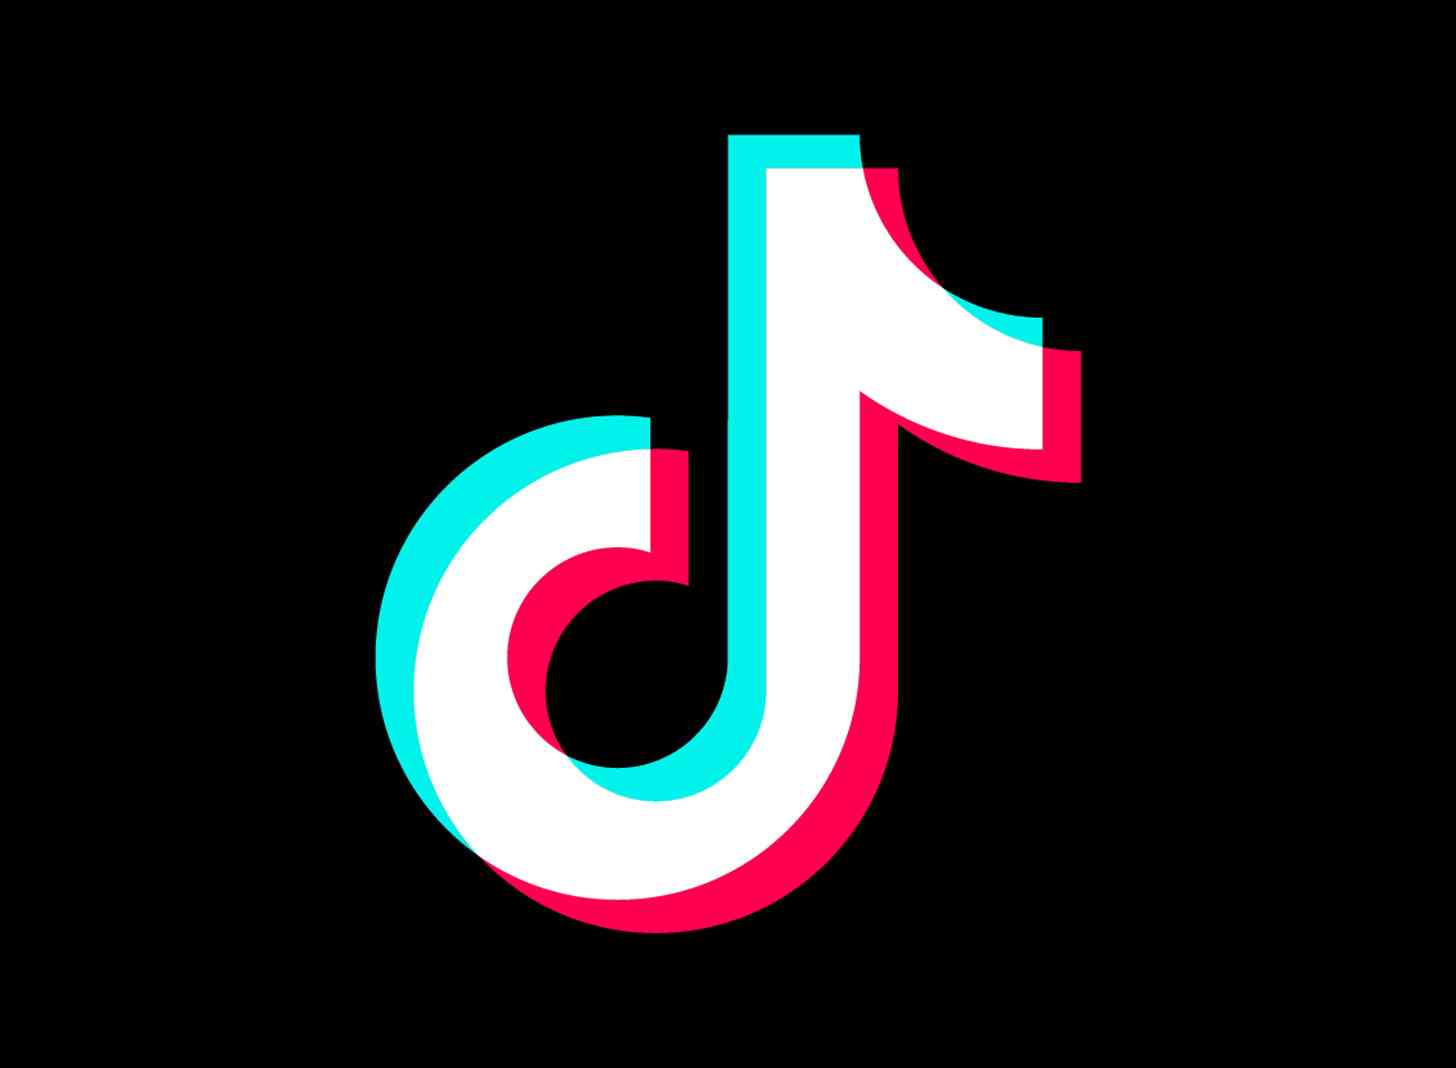 TikTok and WeChat app store downloads will be banned in the US on